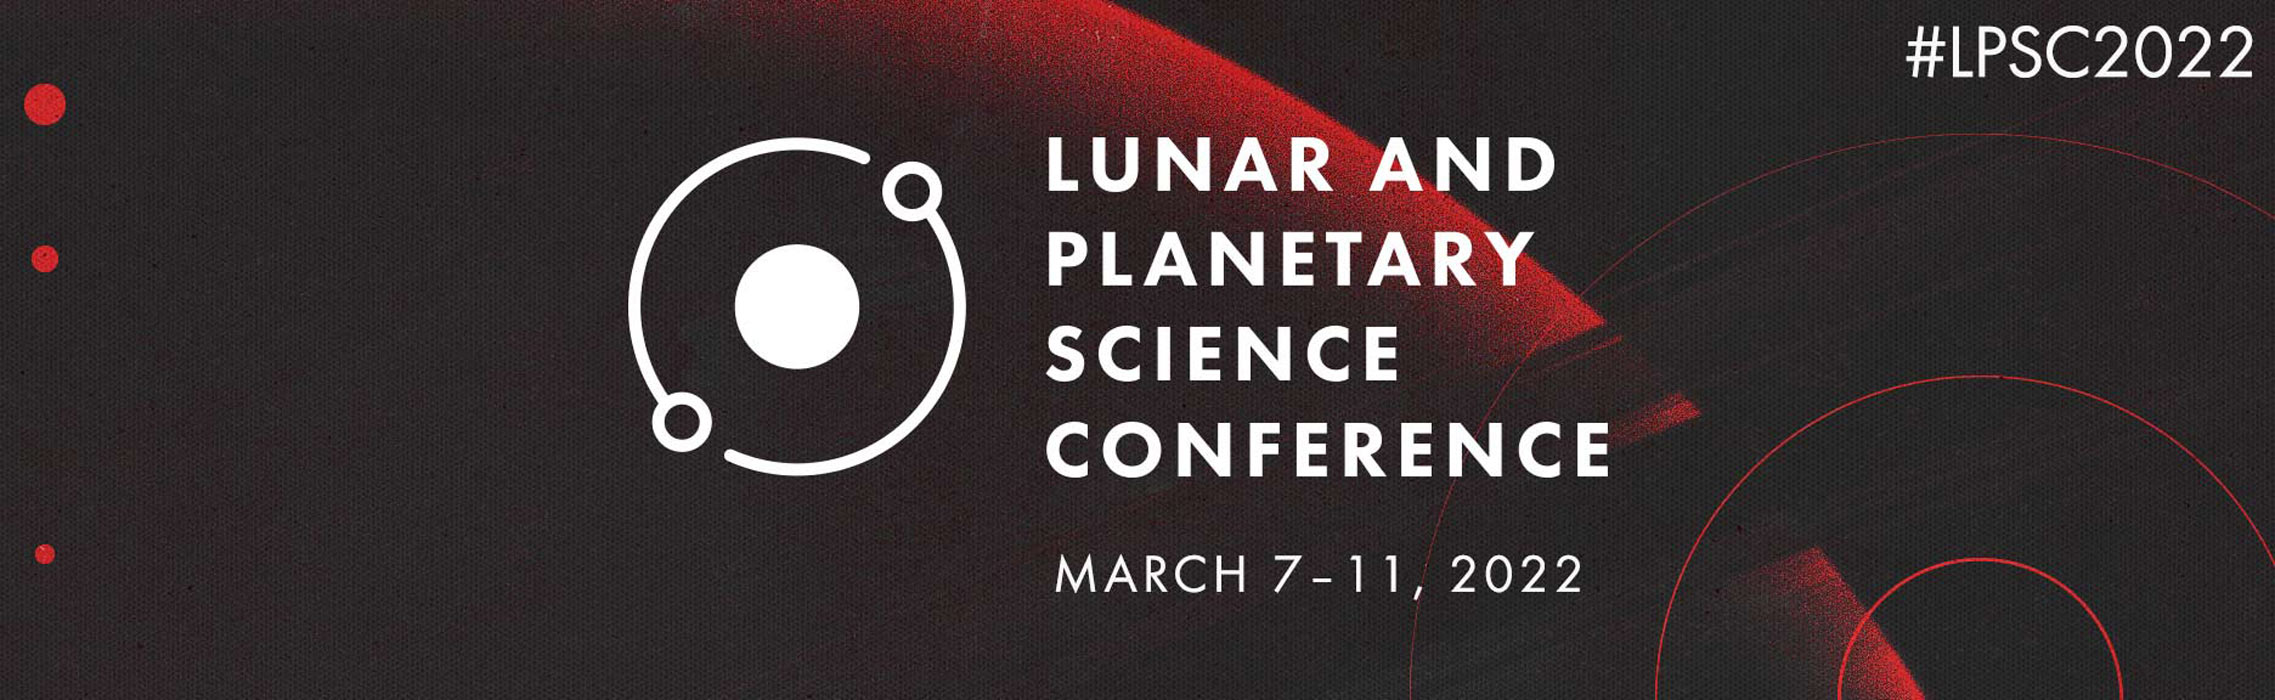 Lunar and Planetary Science Conference